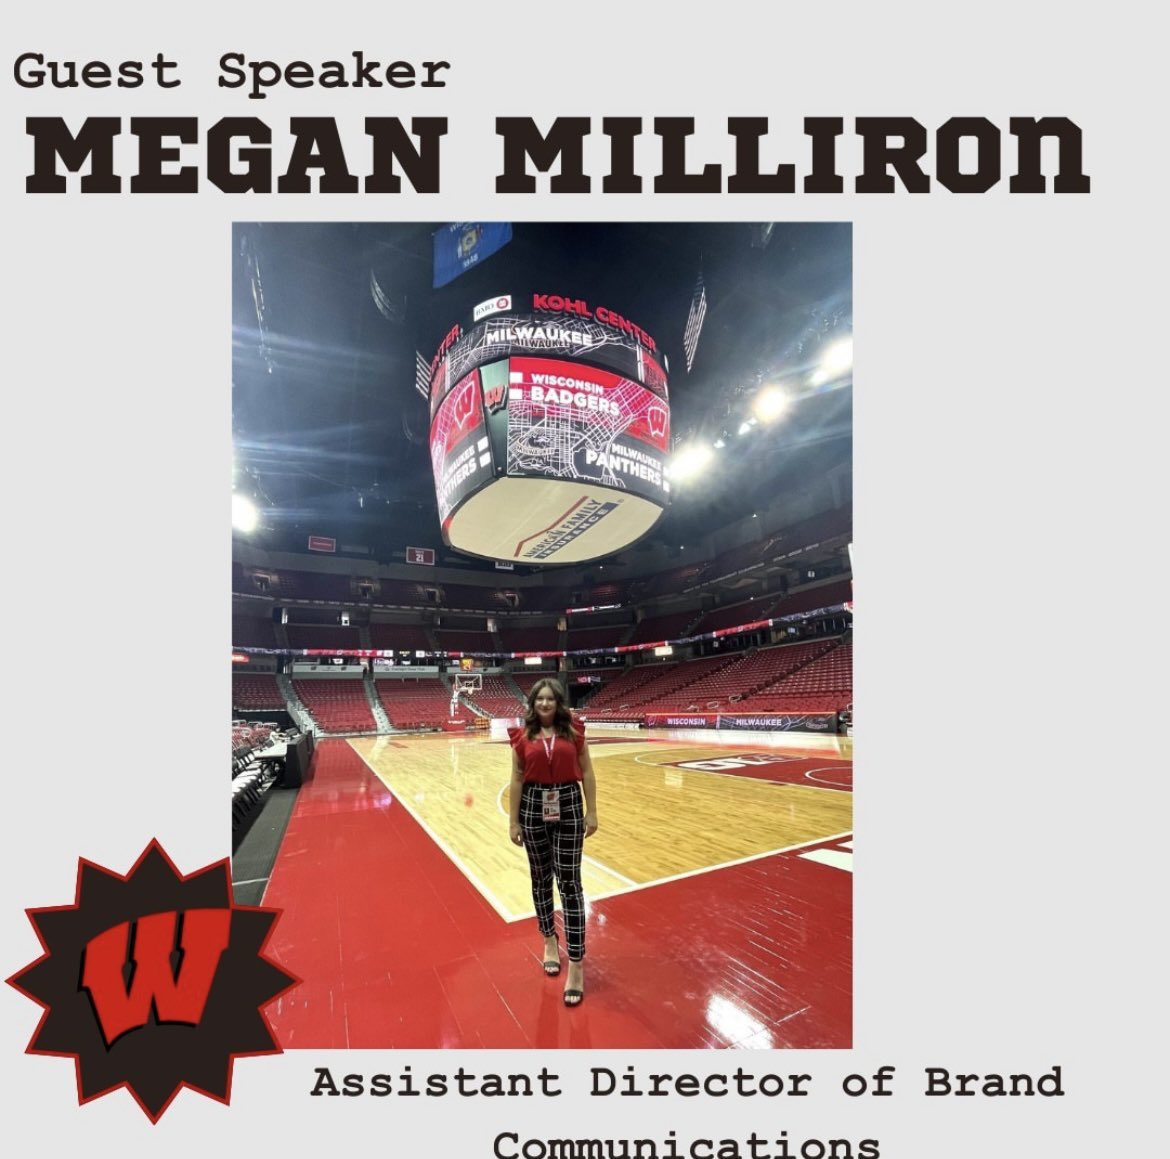 I’d like to thank Kali Mick and the University of Wisconsin chapter of the Association for Women in Sports Media for having me at their meeting tonight! So happy I could share my unique career path and sports knowledge to the future leaders in sports! Was a blast! #OnWisconsin